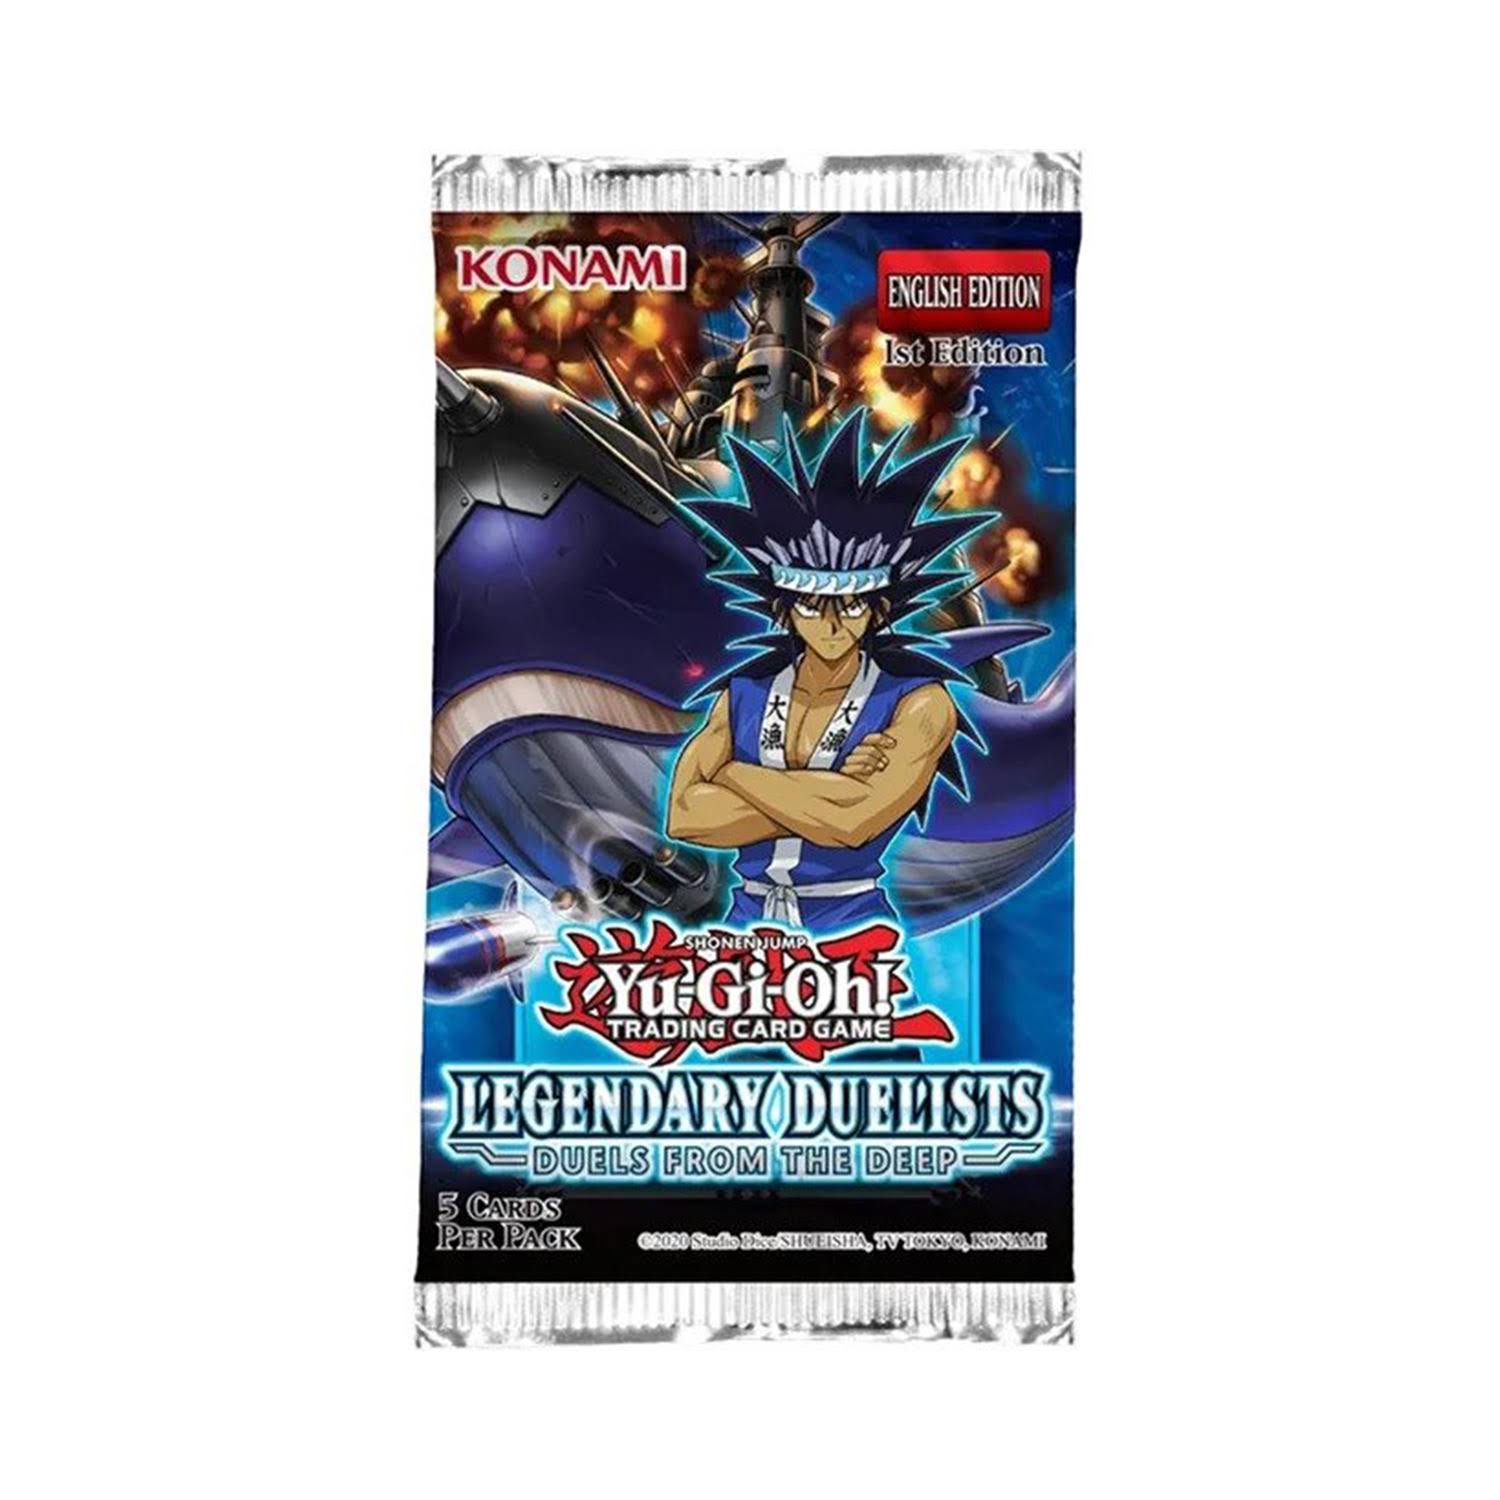 Yu-Gi-Oh Legendary Duelists: Duels from The Deep Booster Pack